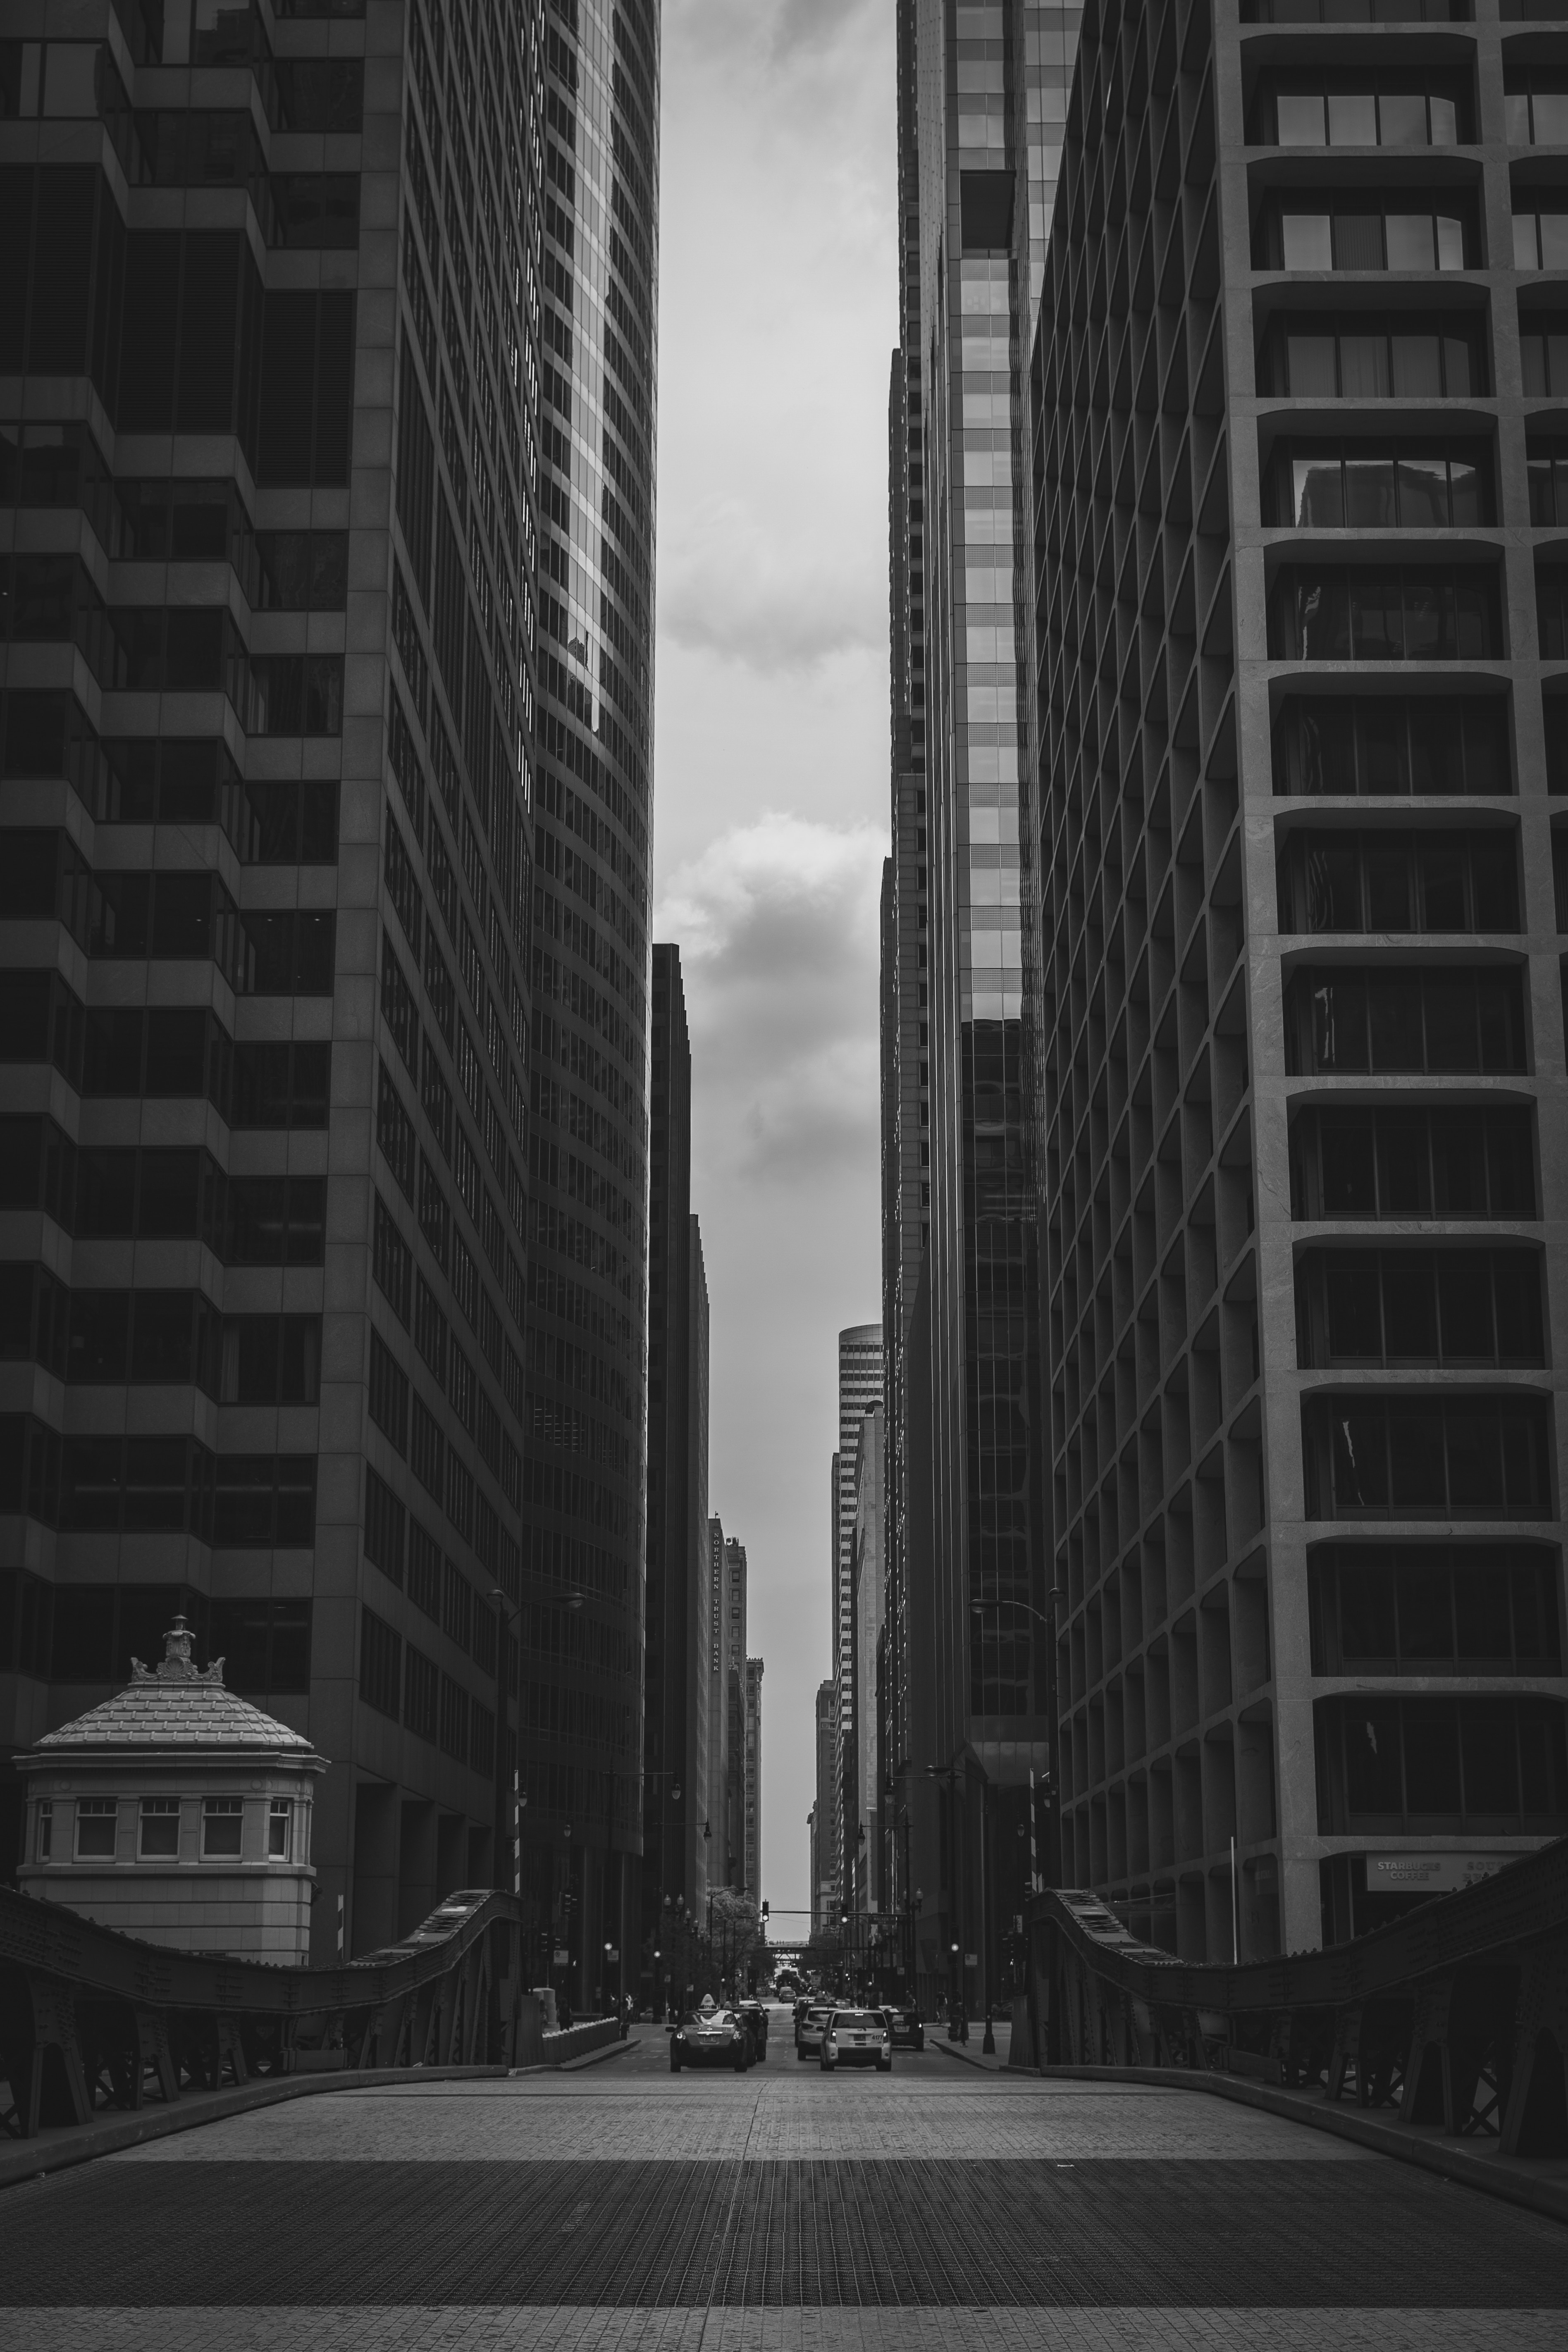 bw, cities, city, building, chb